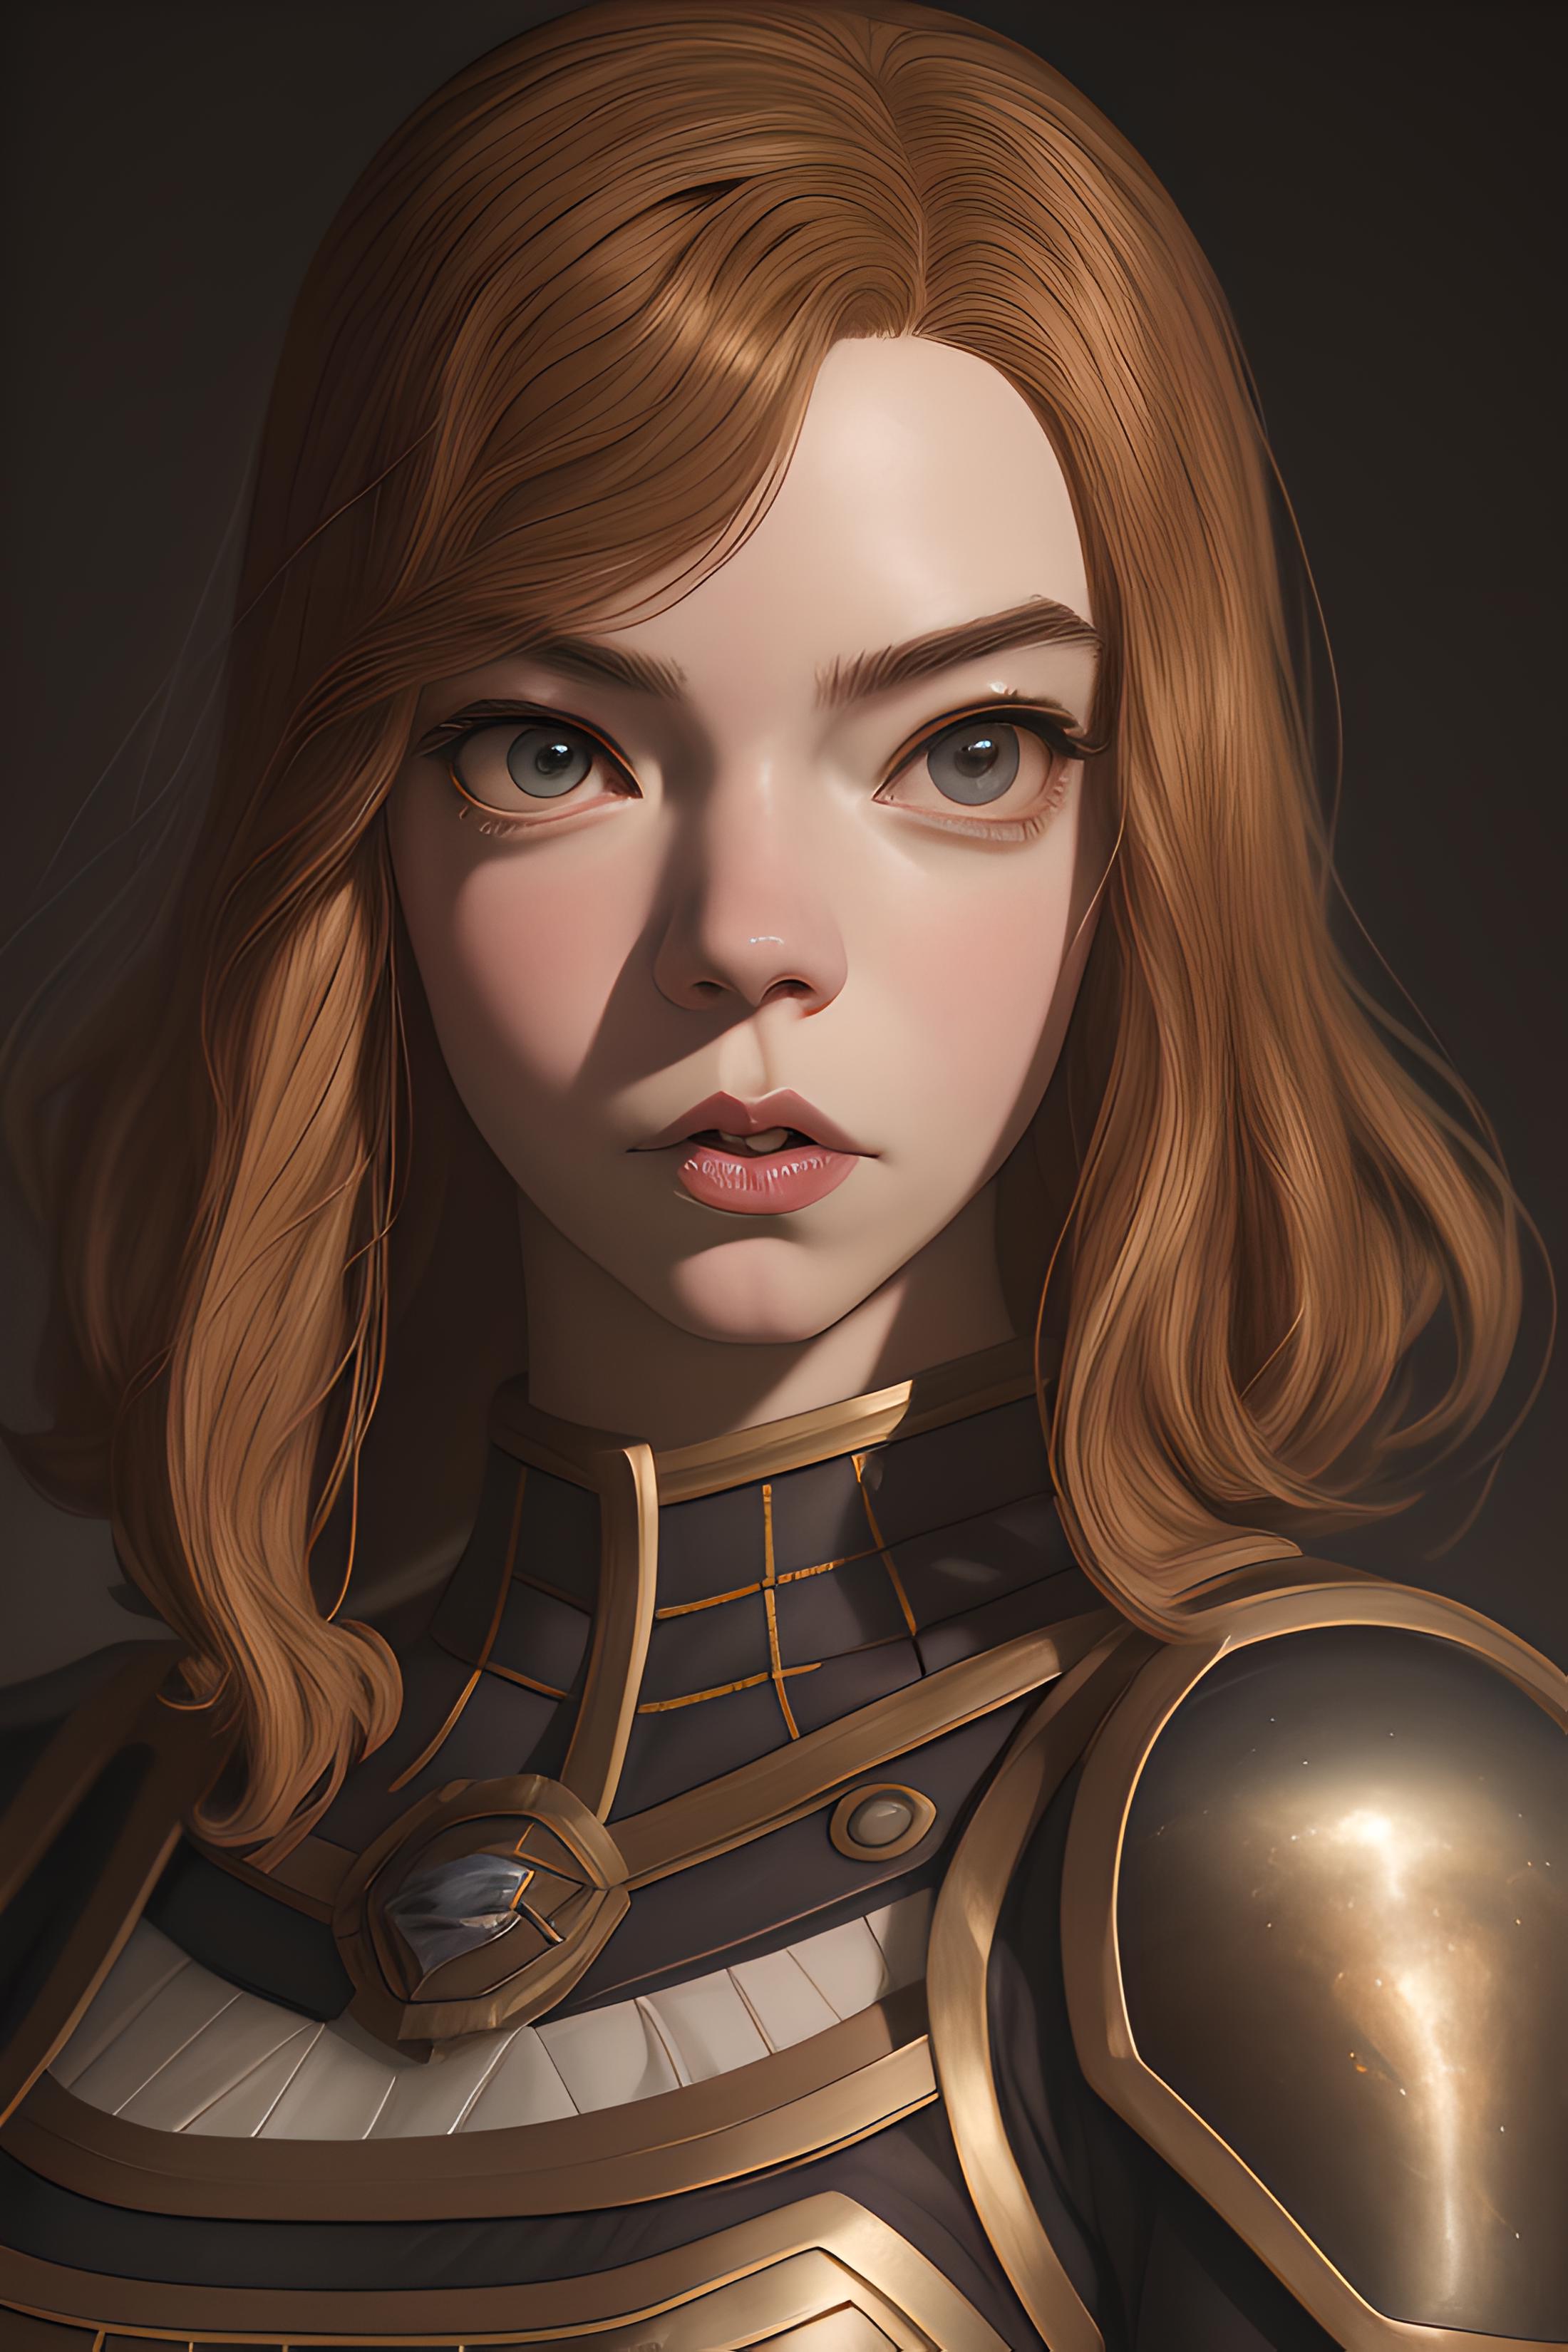 Anya Taylor Joy - The Queen's Gambit image by rodomade